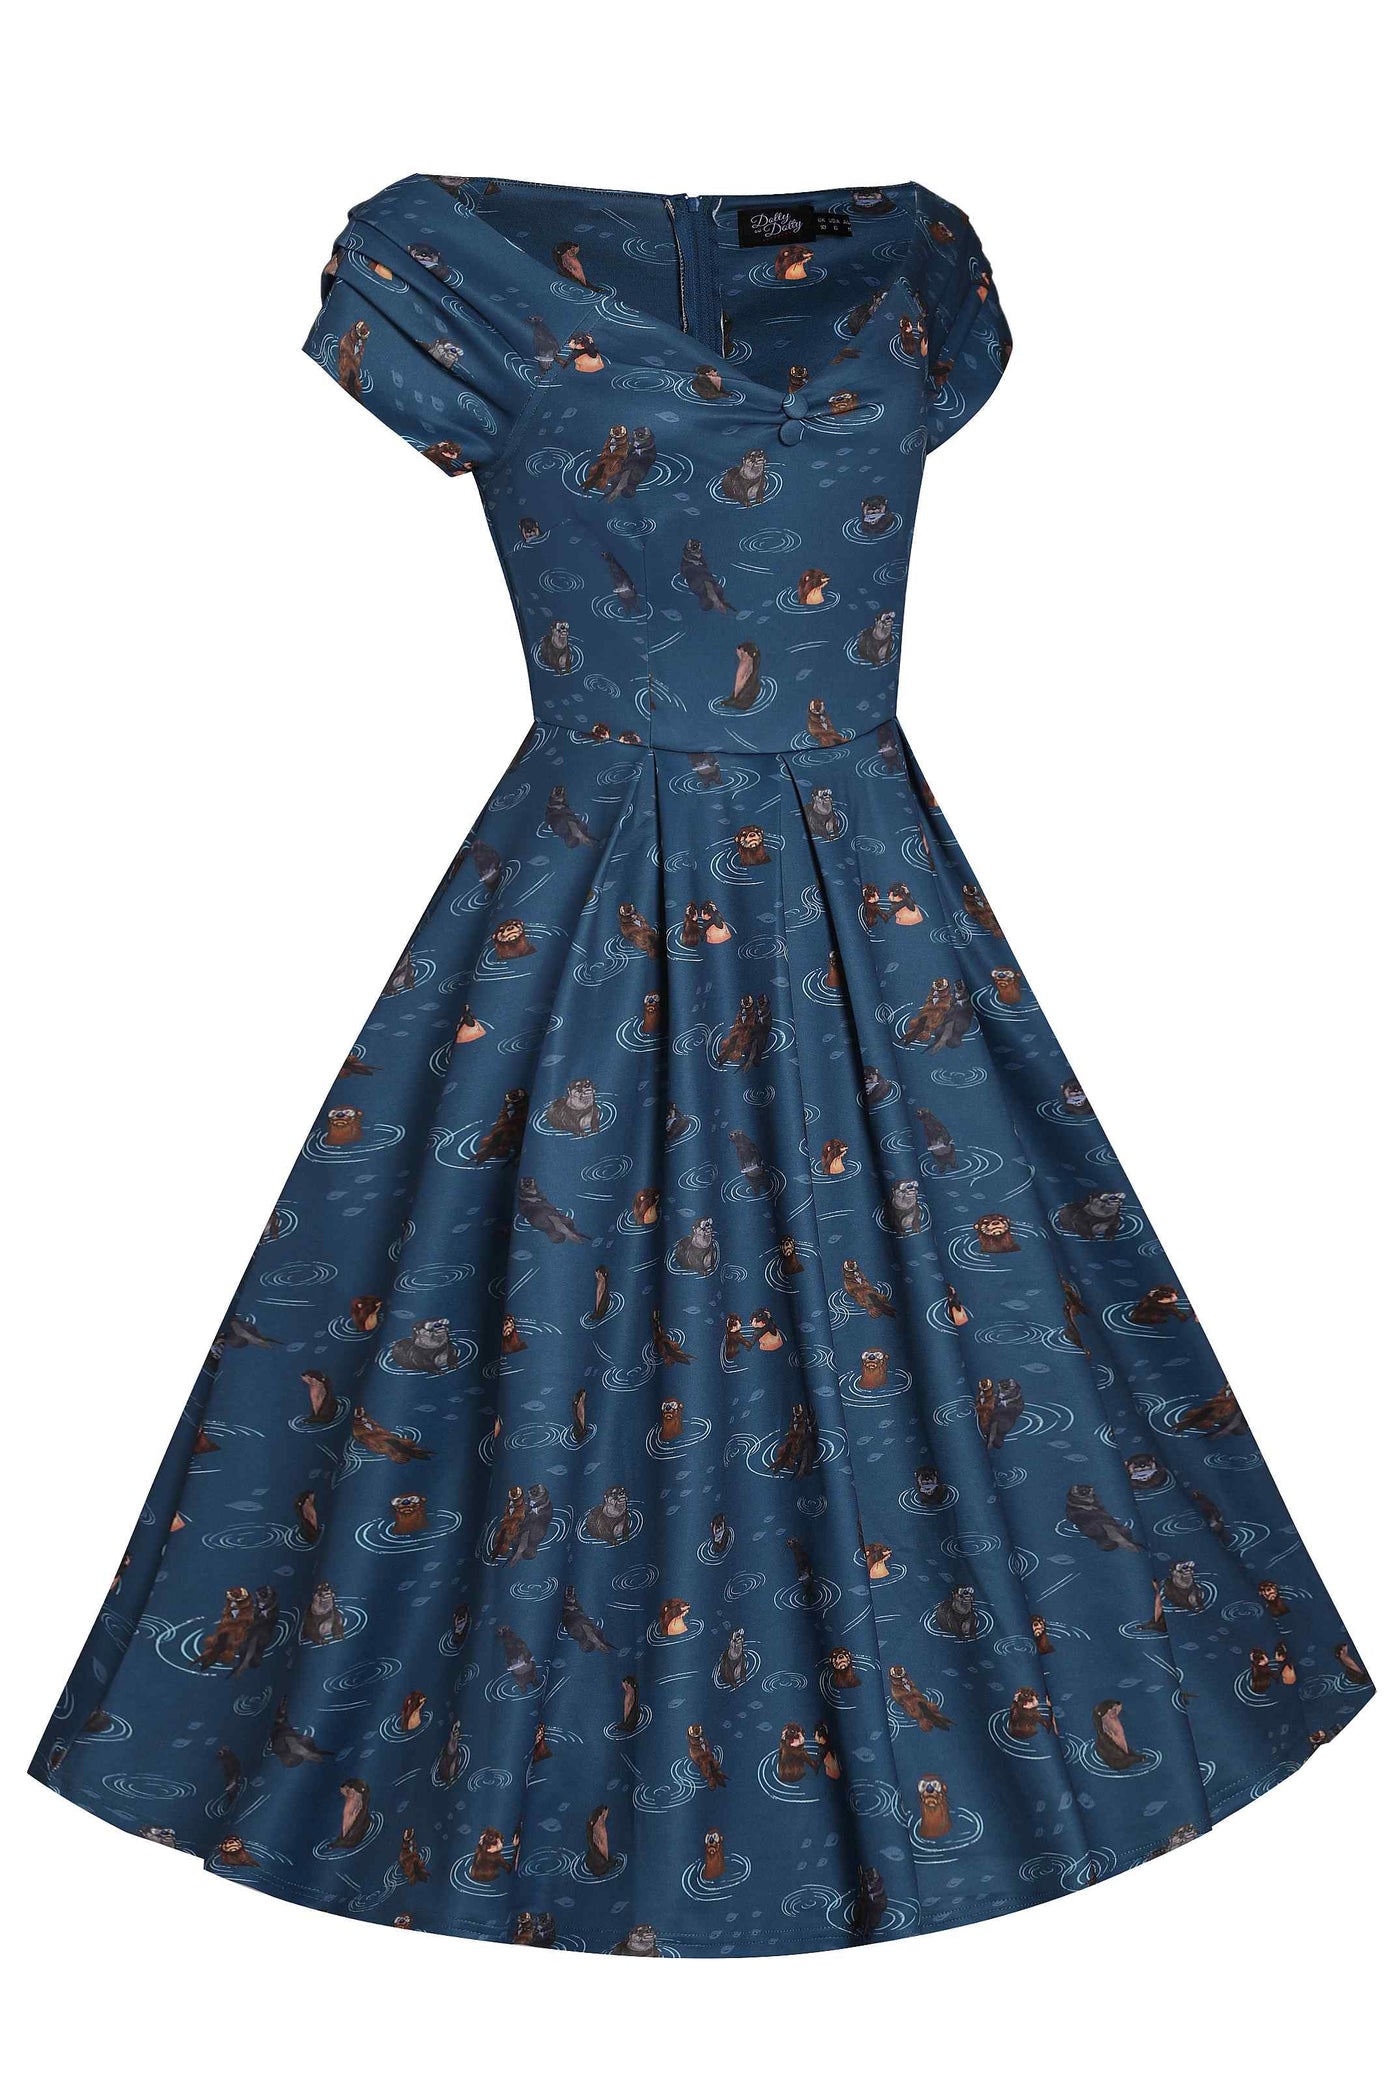 Close up View of Otter Print Off-Shoulder Circle Dress in Blue